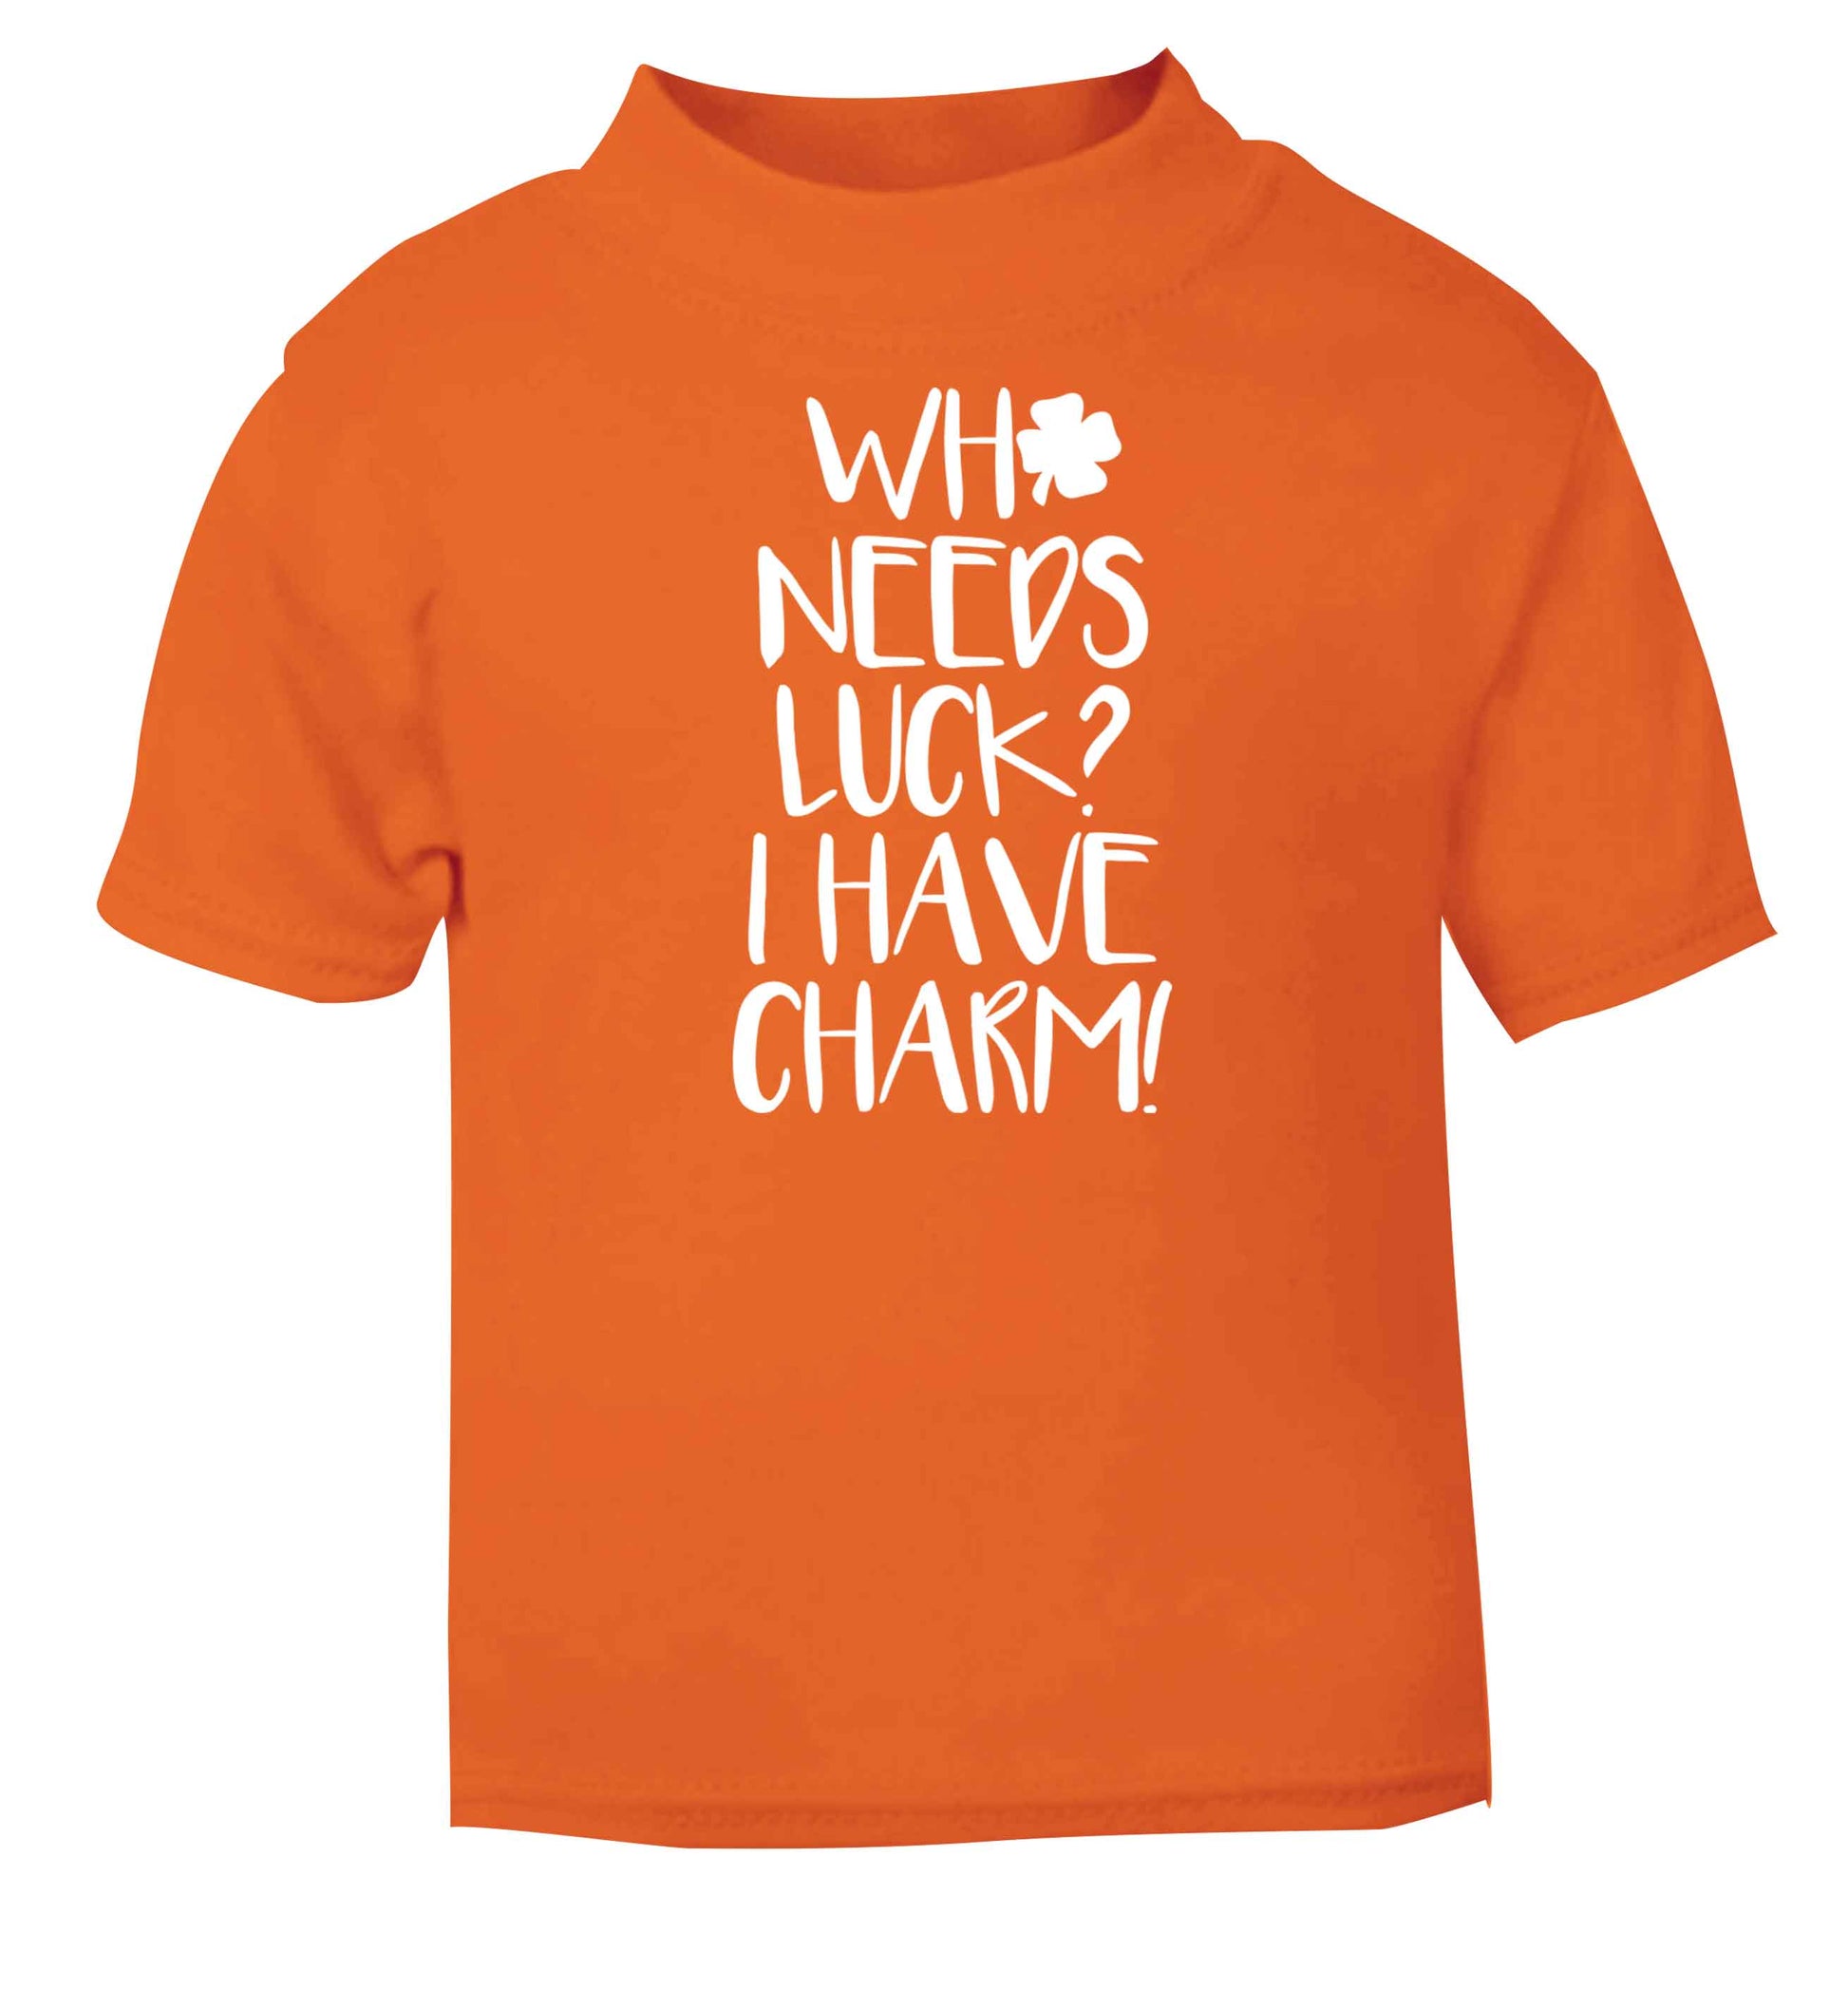 Who needs luck? I have charm! orange baby toddler Tshirt 2 Years